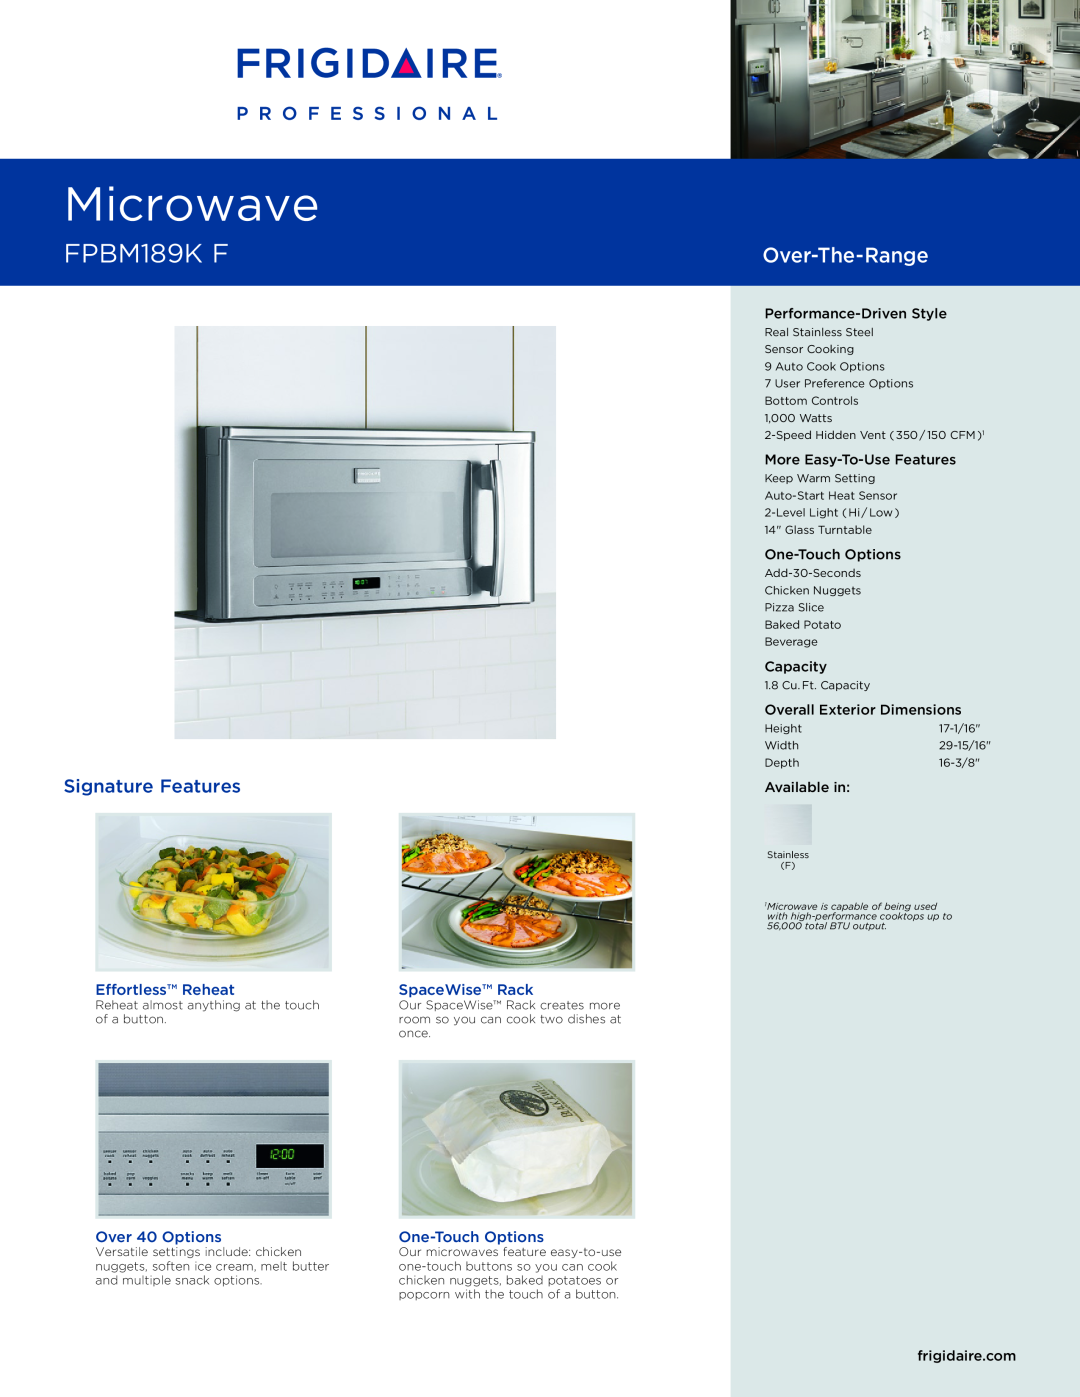 Frigidaire FPBM189K dimensions Performance-DrivenStyle, More Easy-To-UseFeatures, One-TouchOptions, Capacity, Available in 